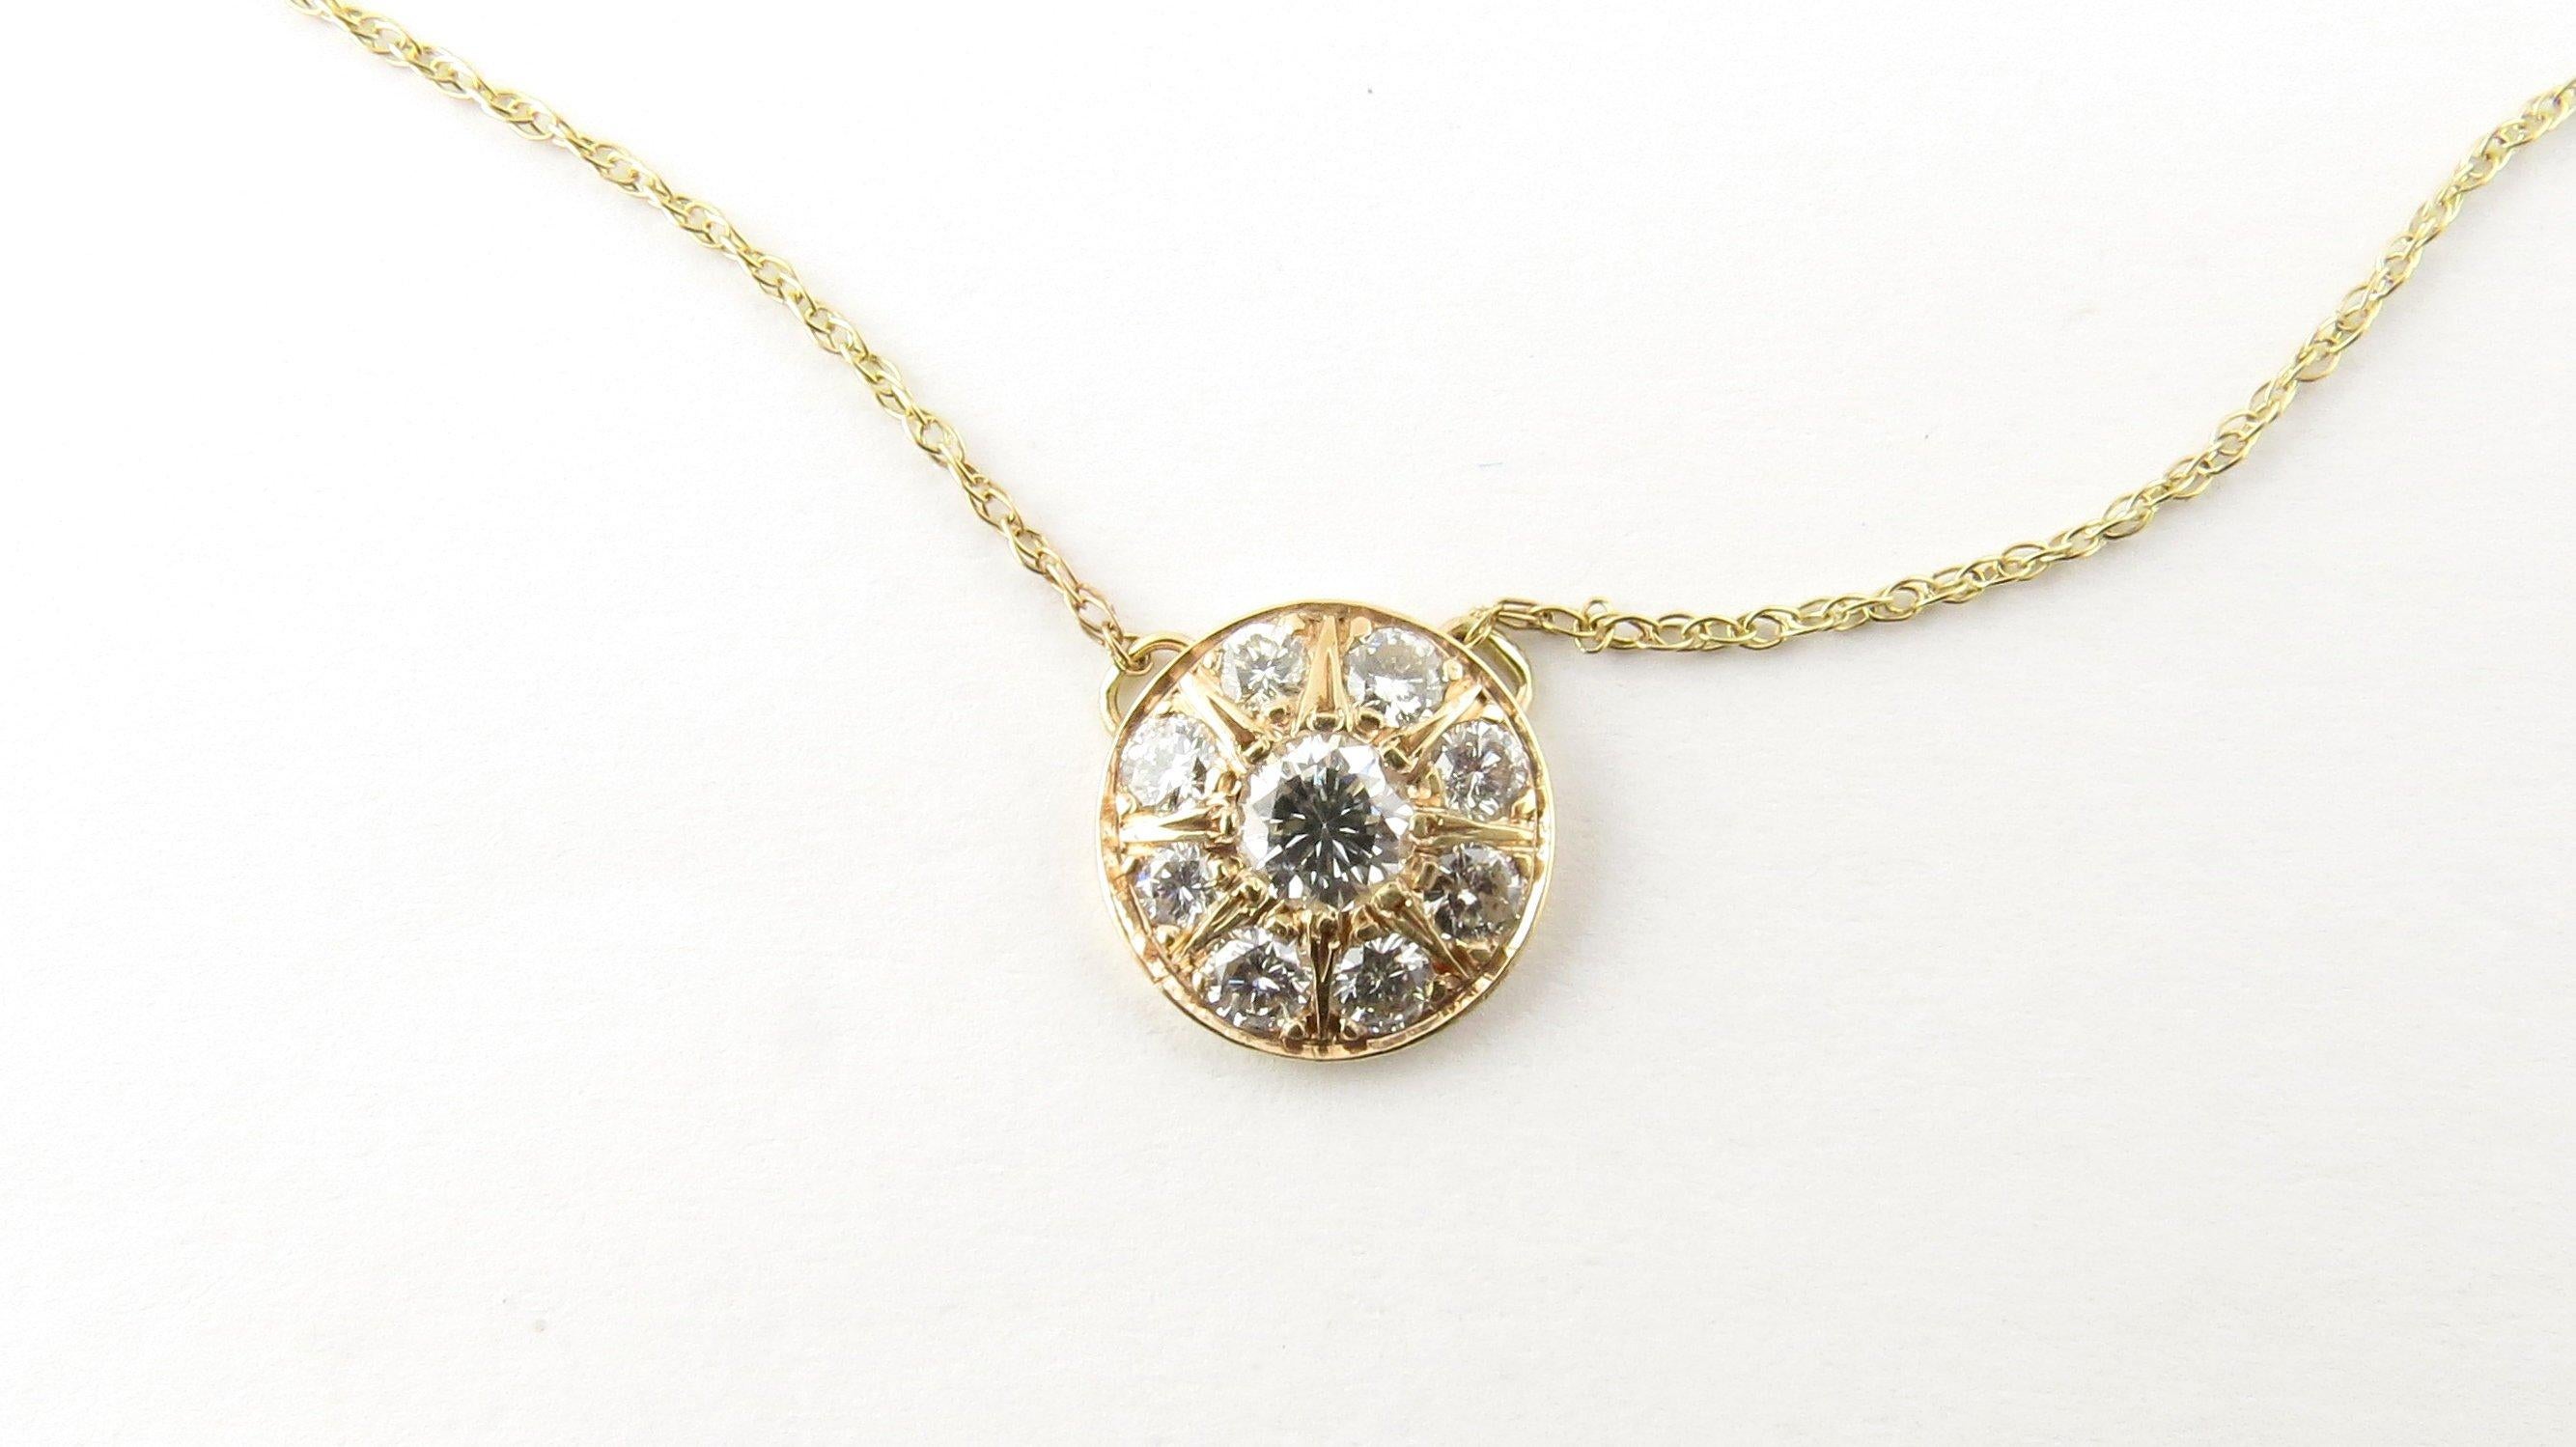 Vintage 14 Karat Yellow Gold and Diamond Pendant Necklace- This sparkling pendant (10 mm) features eight round brilliant cut diamonds set in classic 14K yellow gold on a delicate cable necklace. Approximate total diamond weight: .39 ct. Diamond